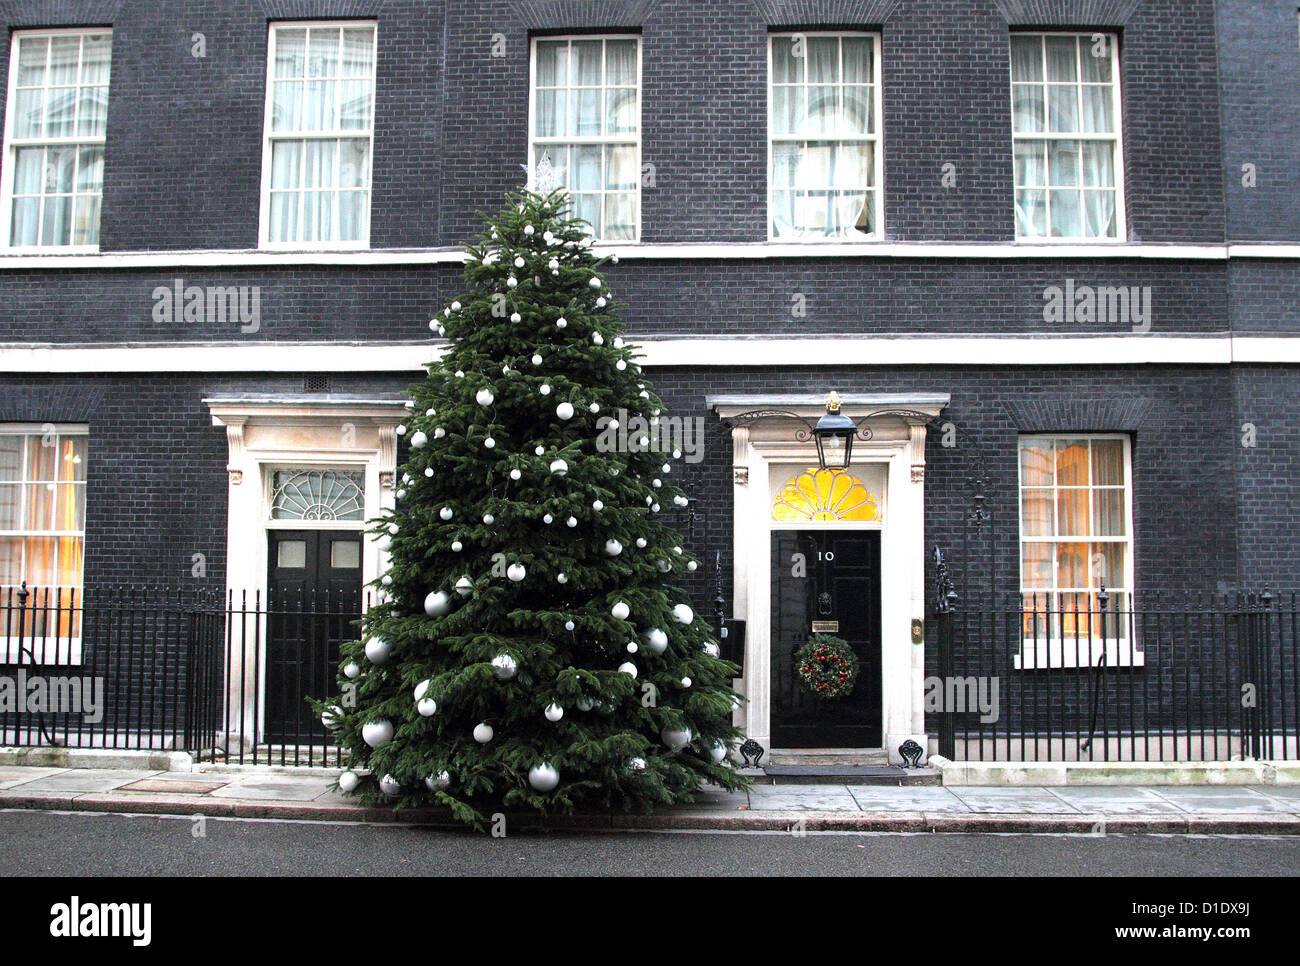 London - Downing Street Christmas Tree 2012 outside the Prime Minister's residence, 10 Downing Street, London - December 17th 2012   Photo by Keith Mayhew Stock Photo